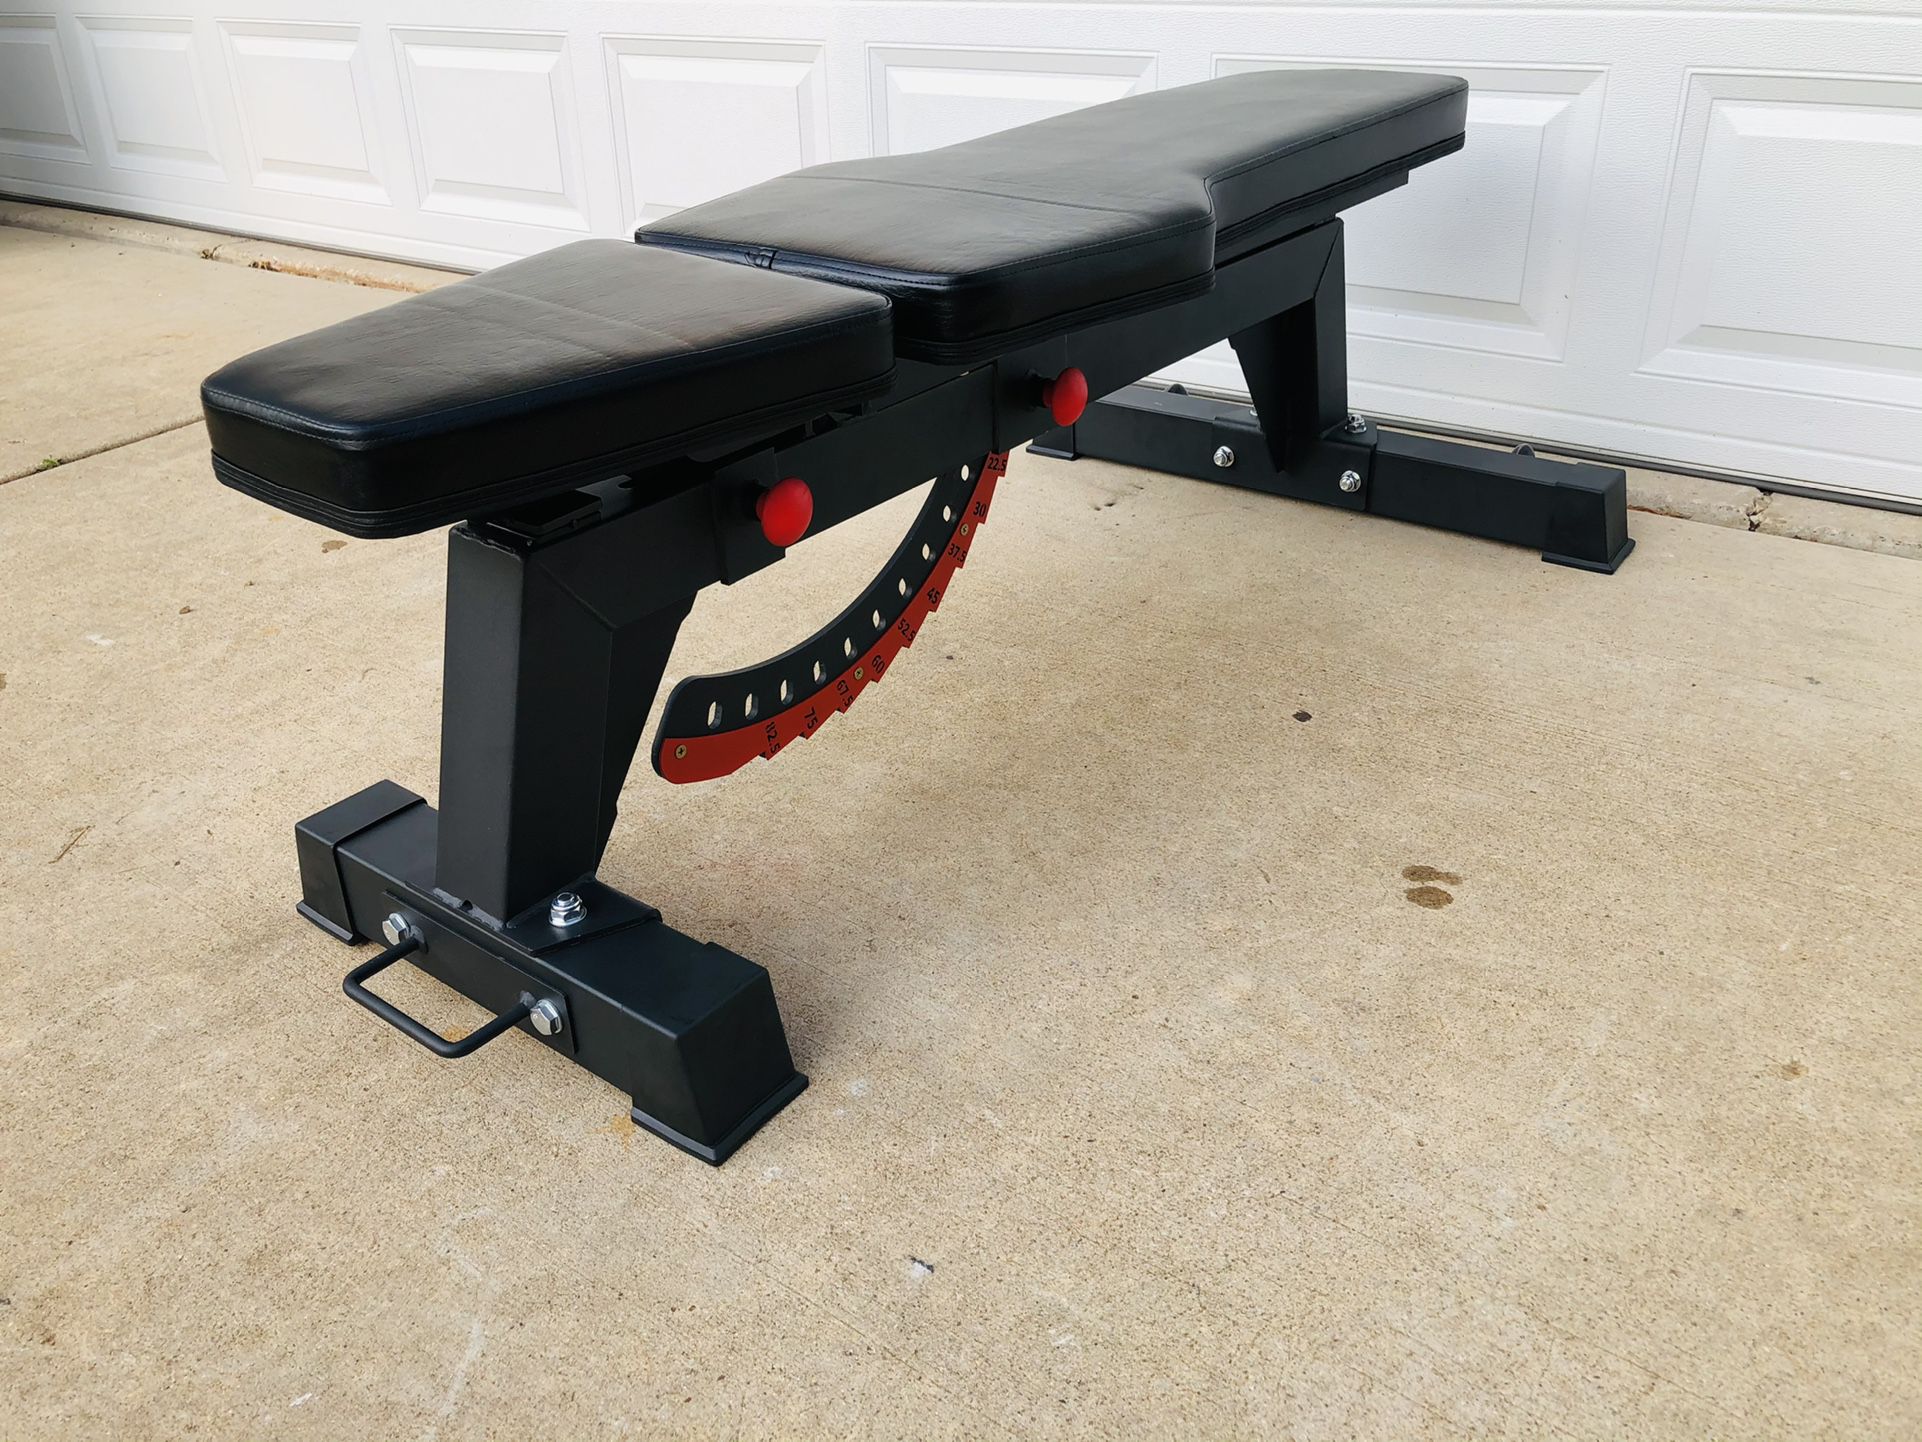 Adjustable Bench - Bench Press - Flat Bench - Incline Bench - Gym Equipment - Fitness - Workout